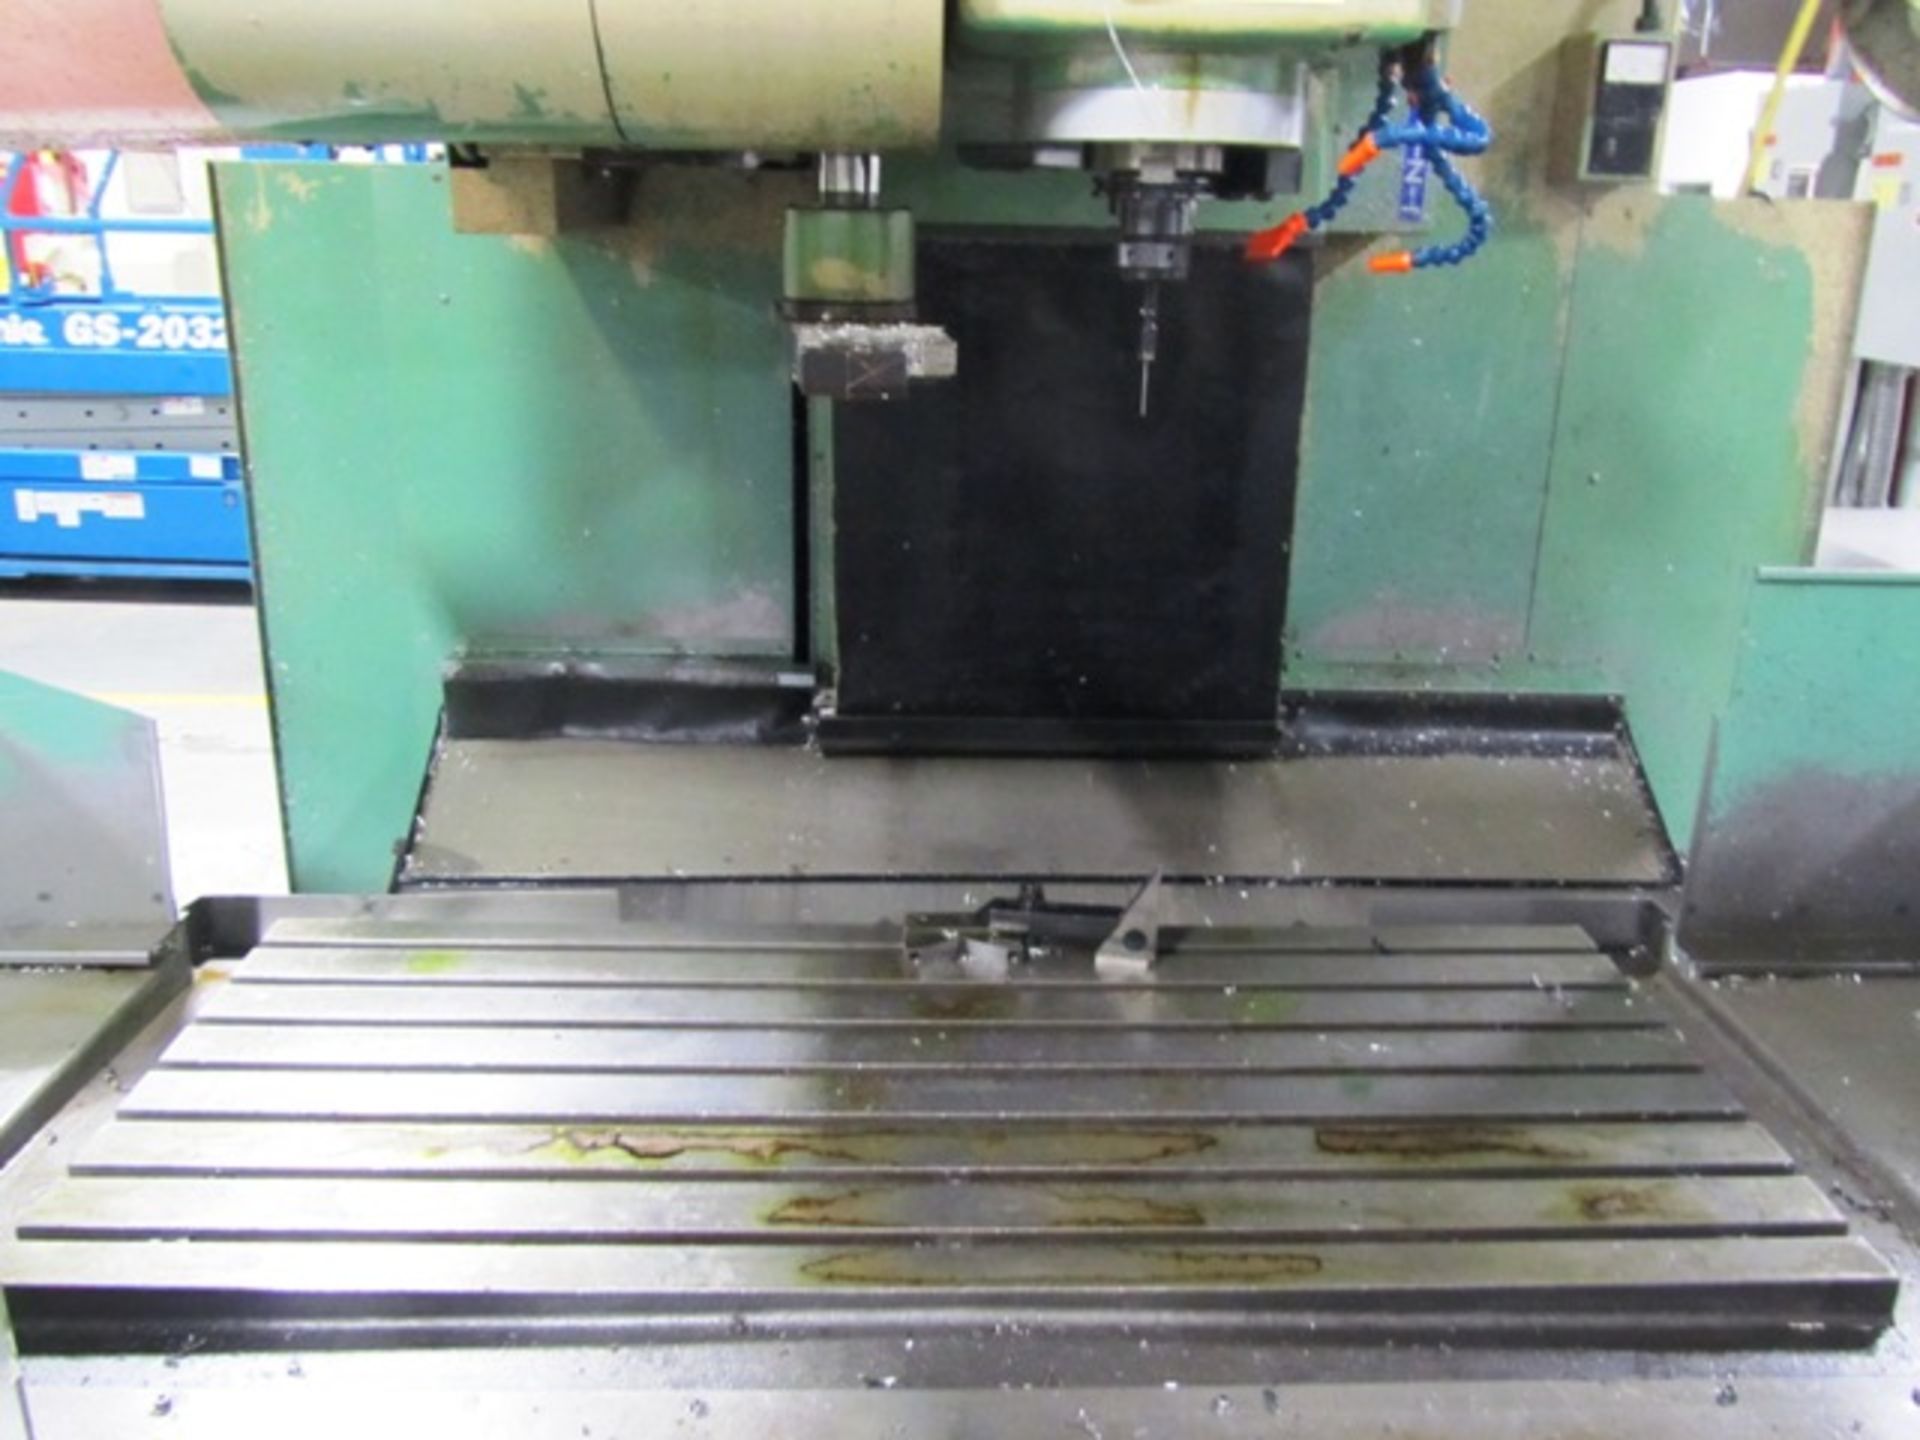 Enshu Model VMC610 CNC Vertical Machining Center with #50 Taper Spindle Speeds to Approx 3500 RPM, - Image 4 of 4